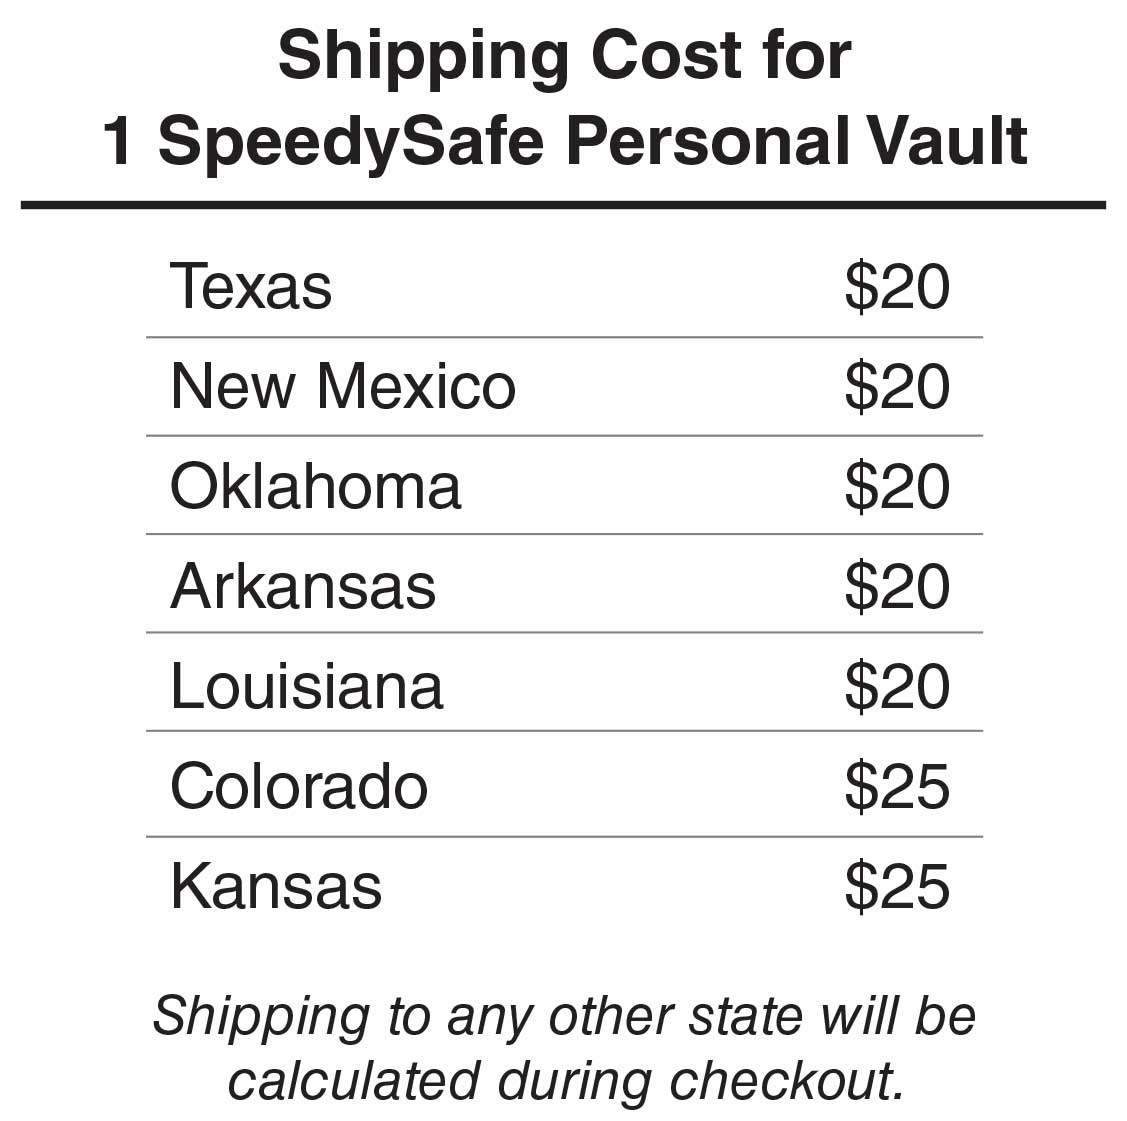 Shipping Costs